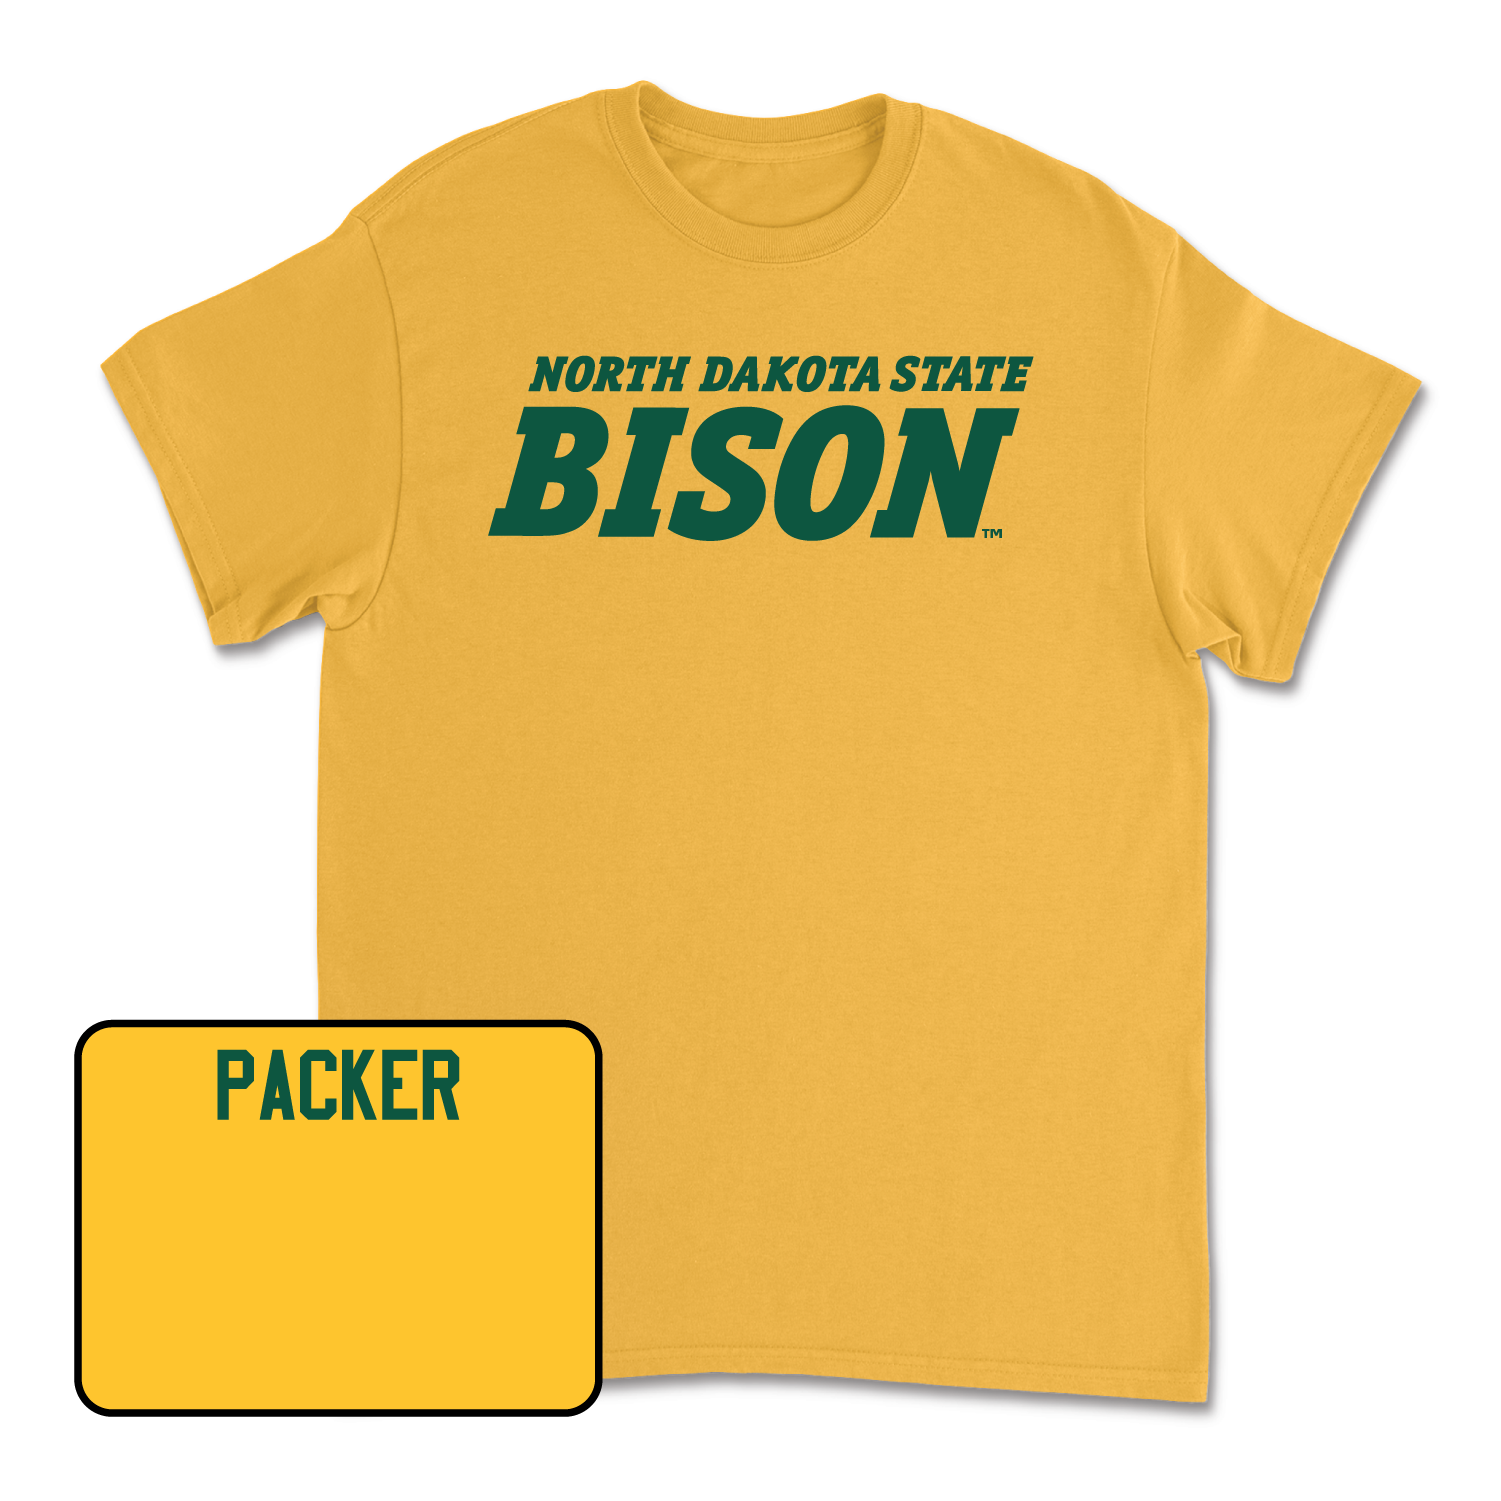 Gold Track & Field Bison Tee 2X-Large / Jack Packer